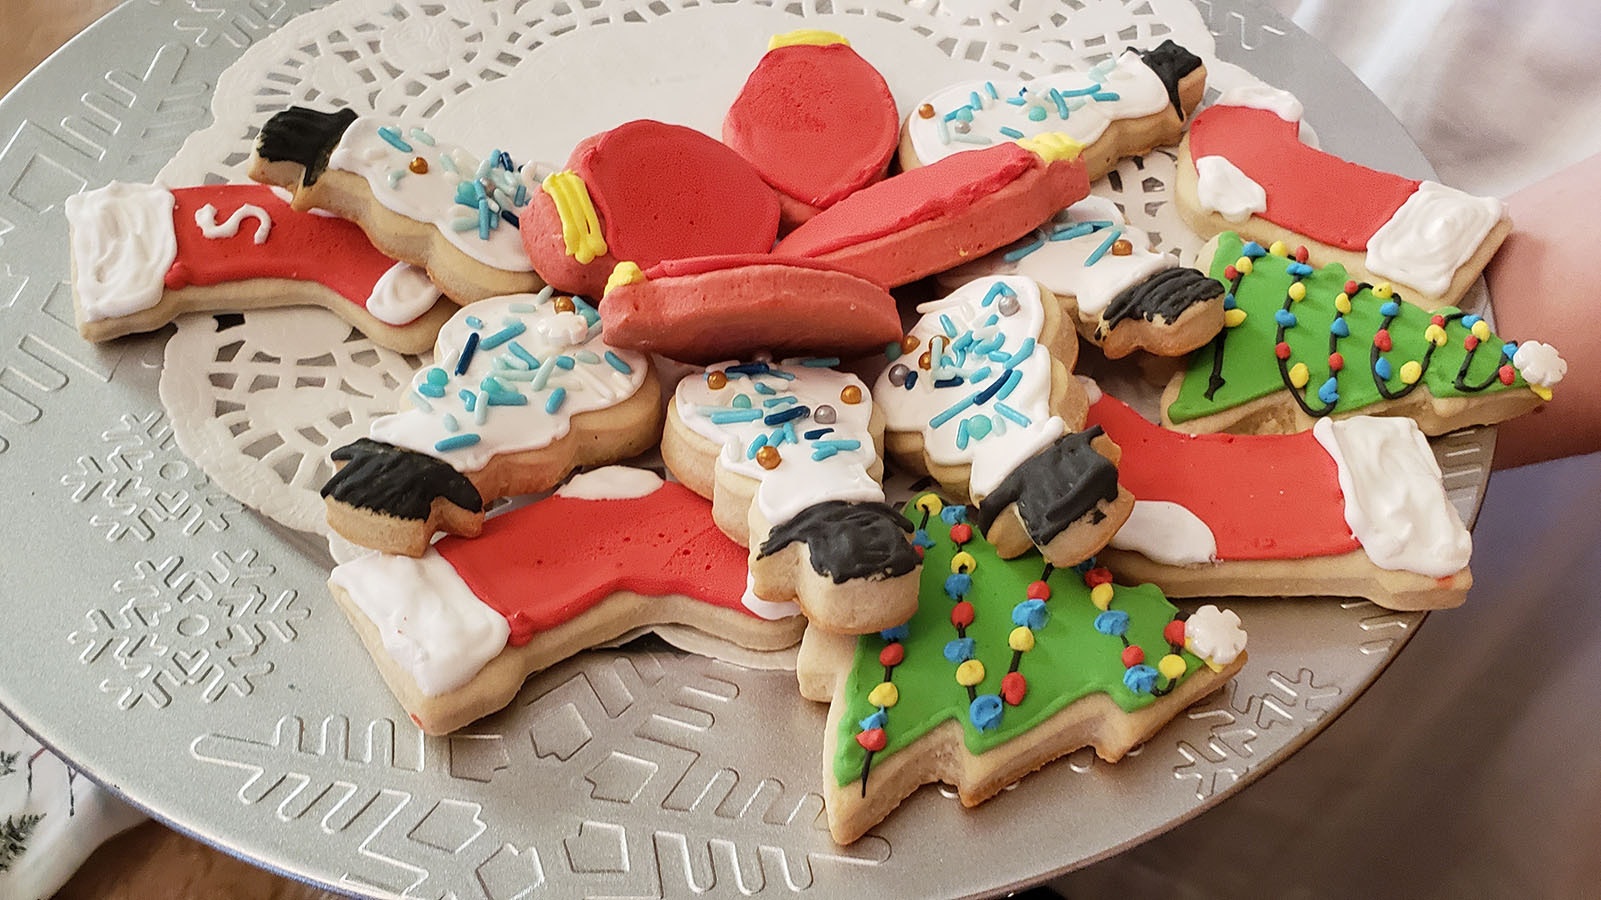 A plate of delicious sugar cookies decorated for the holidays.